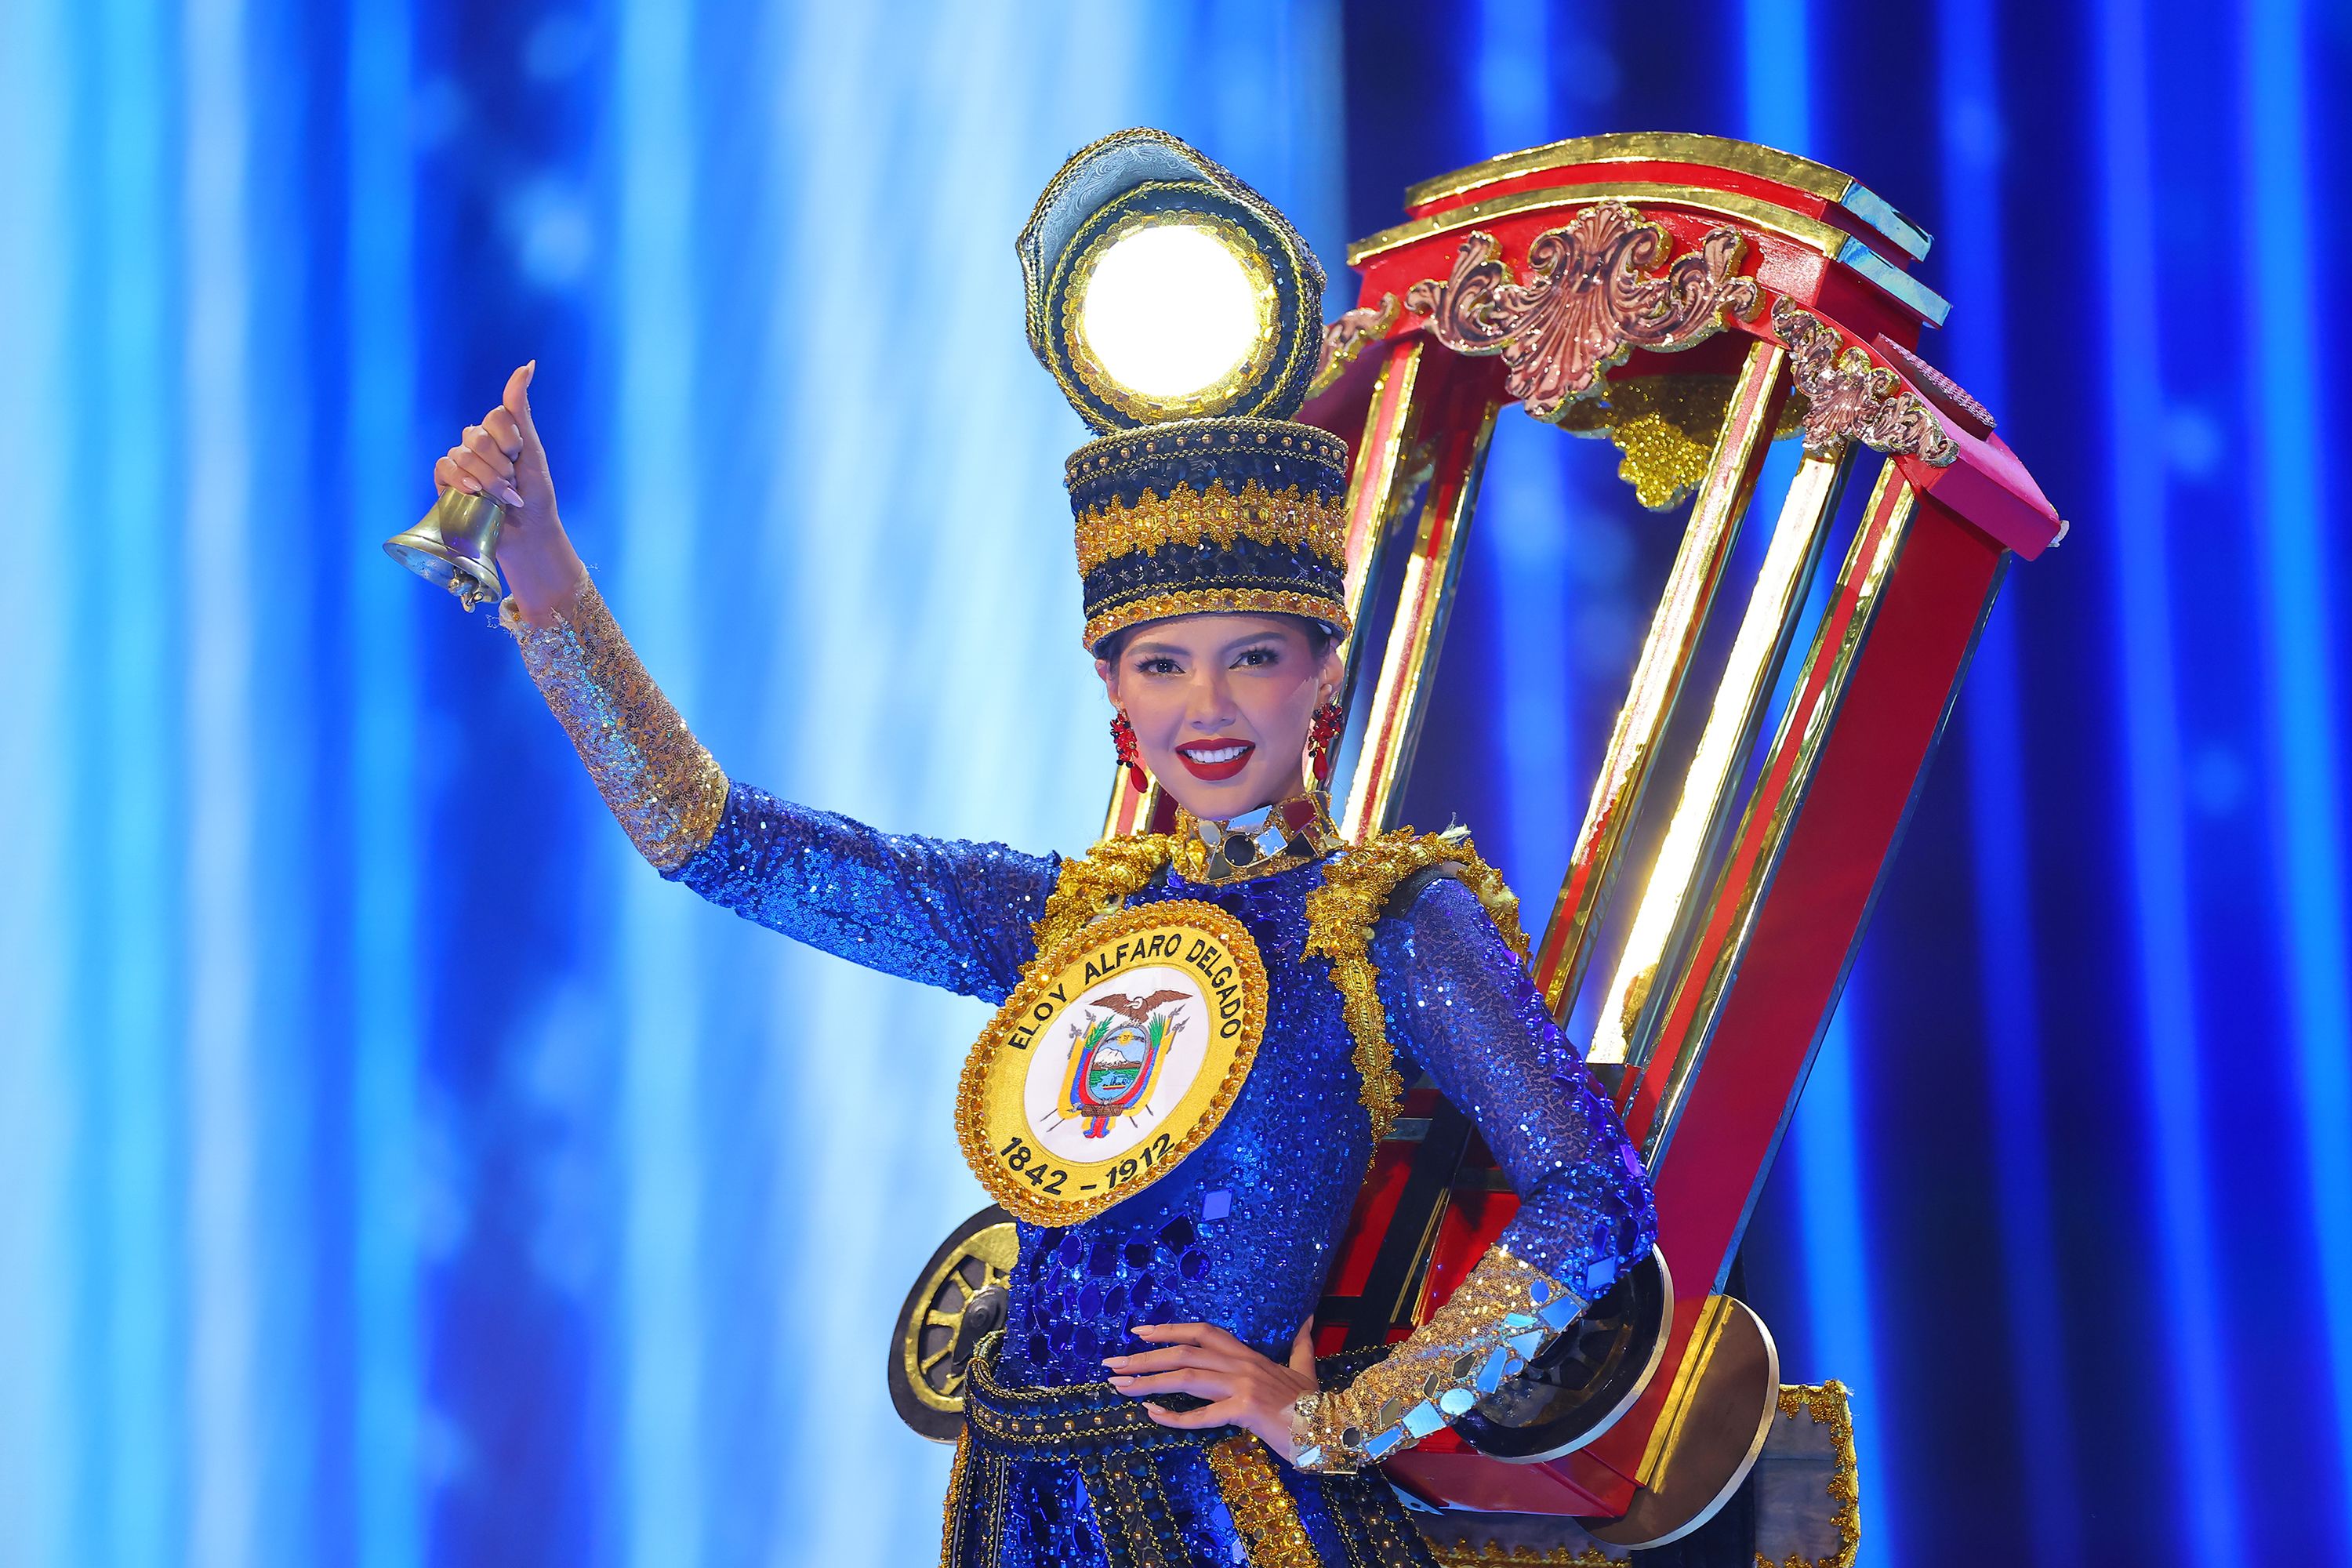 Highlights from the 2023 Miss Universe pageant's national costume